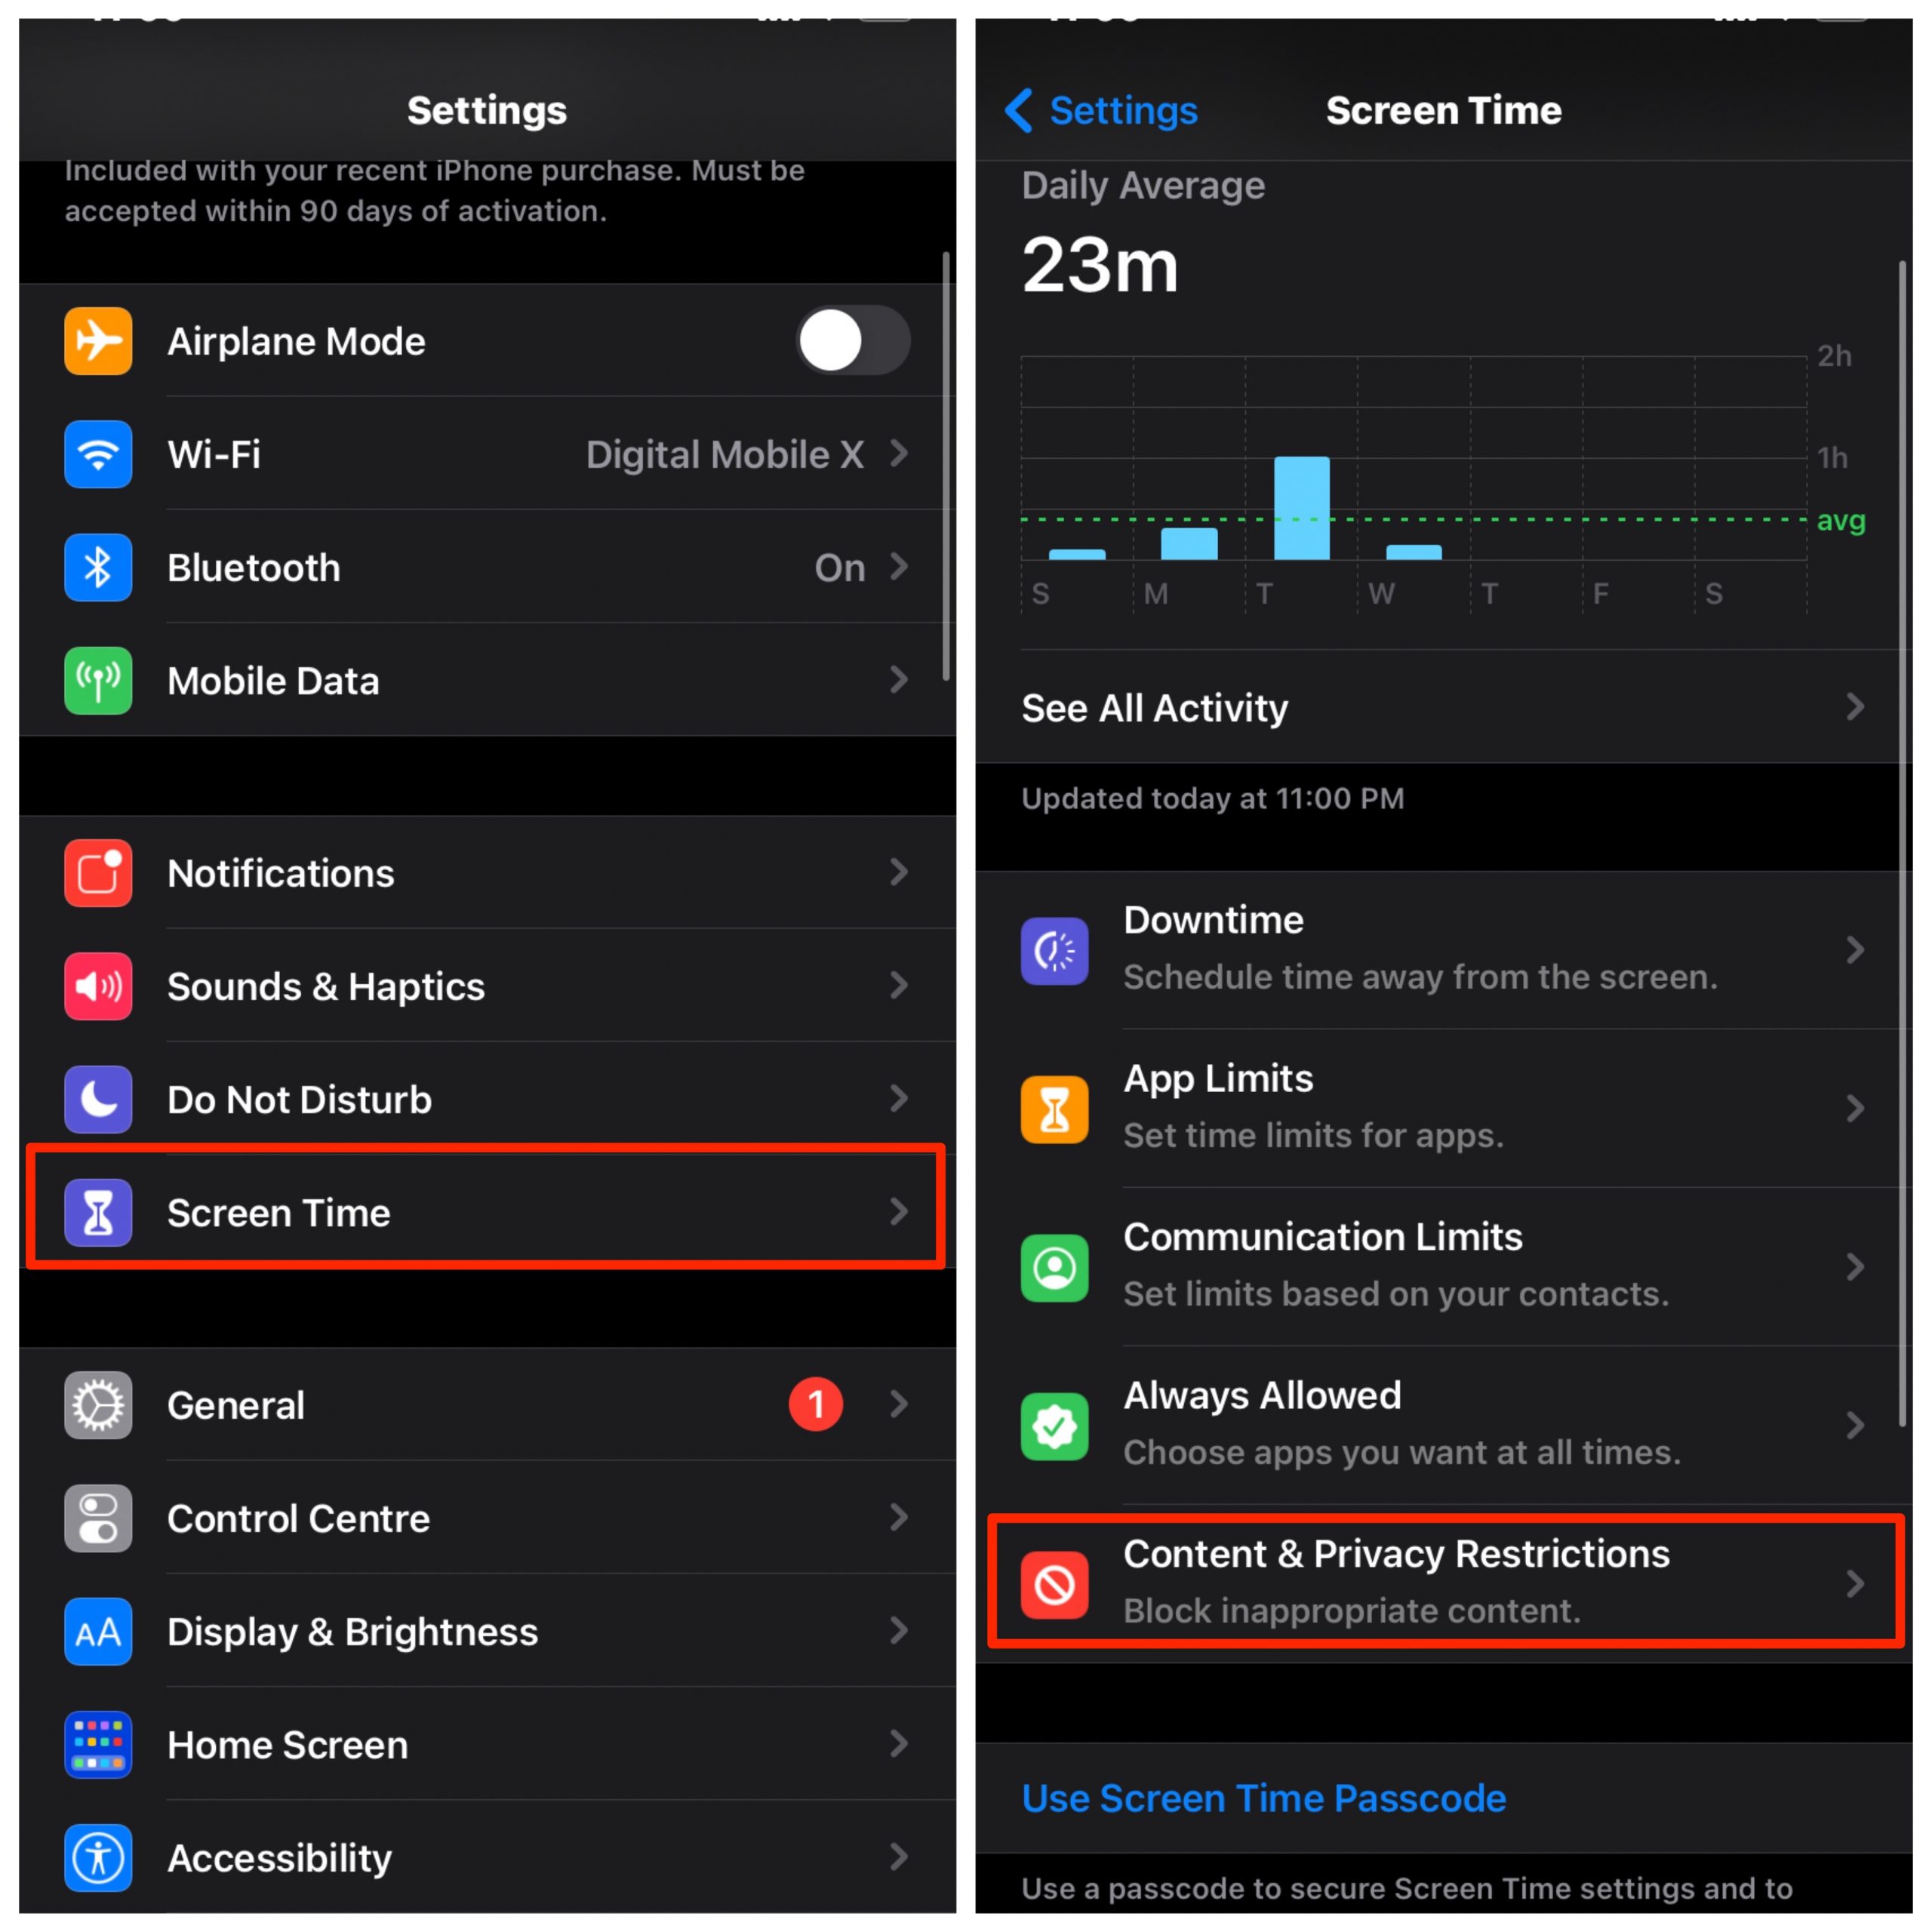 Open Settings, Screen Time and Open Content & Privact Restrictions